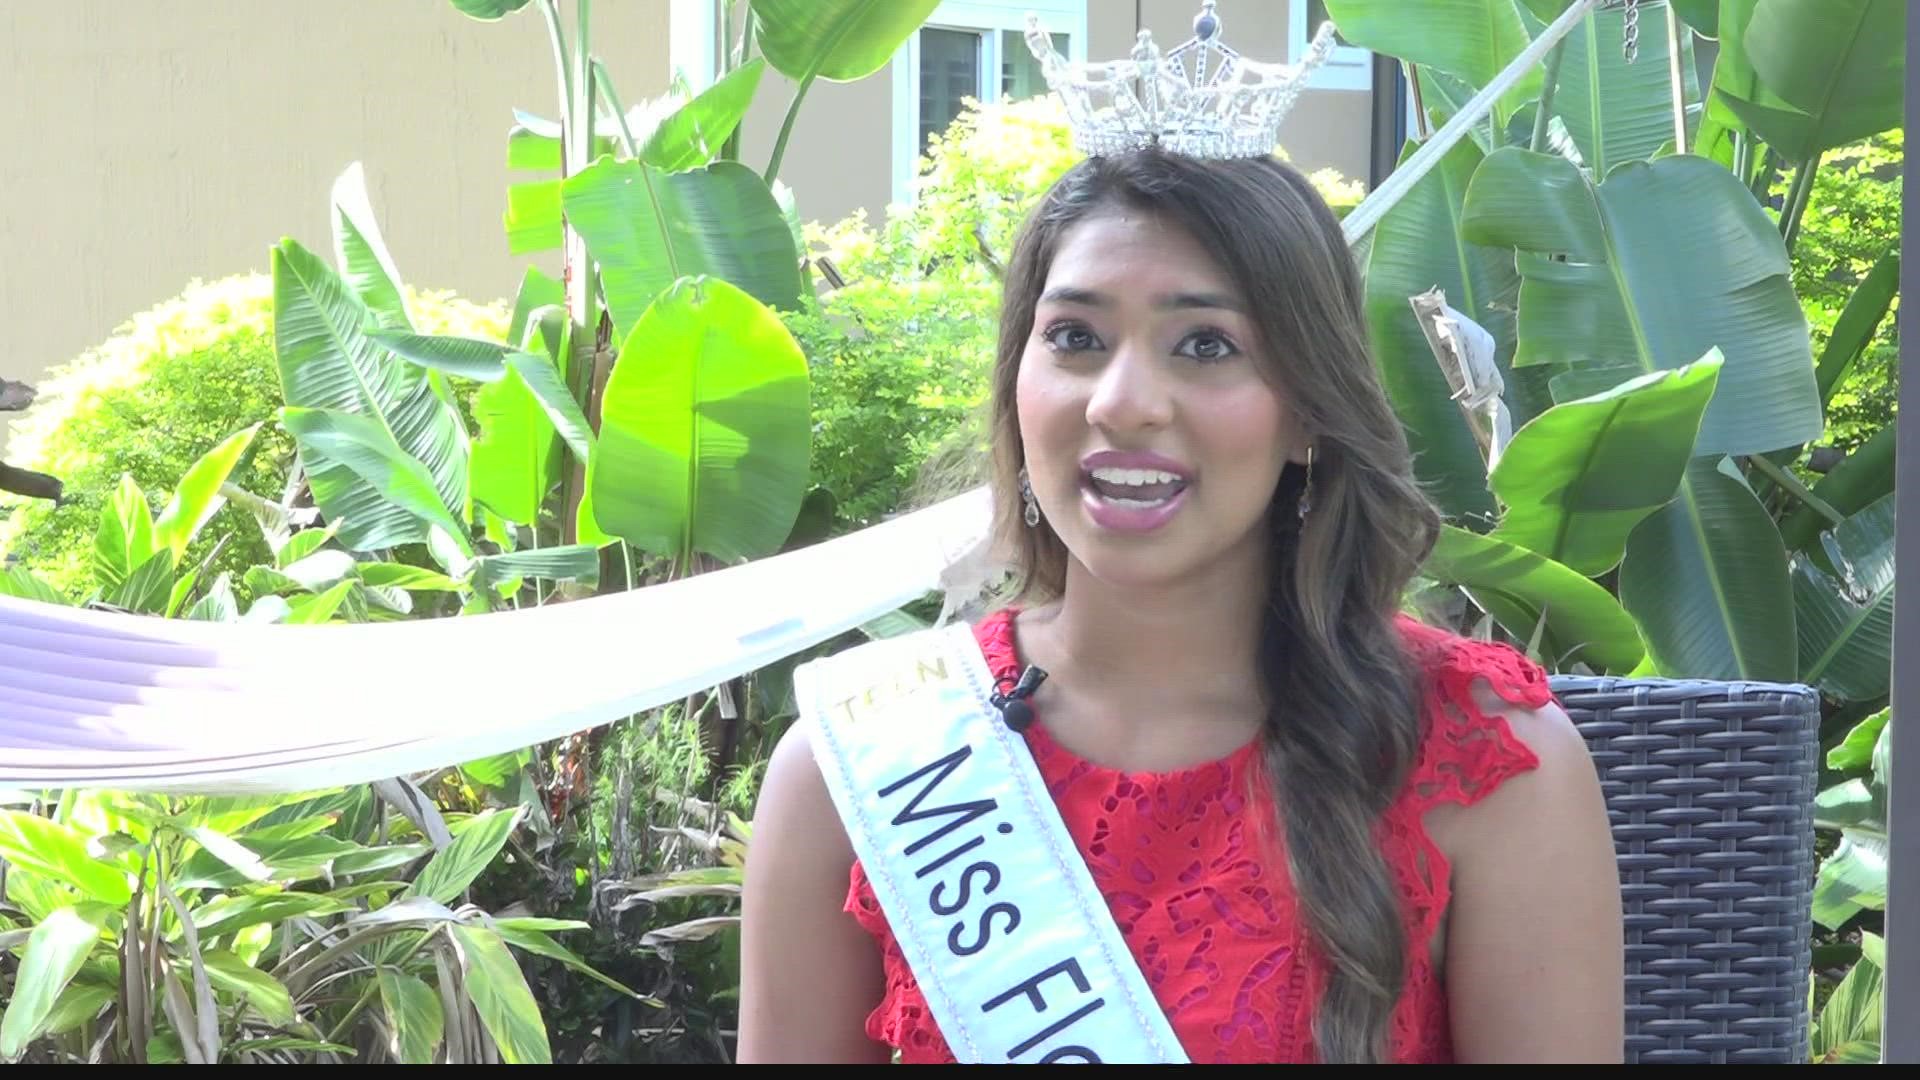 Aashna Shah will compete for Miss America's Outstanding Teen in Dallas Texas this week.